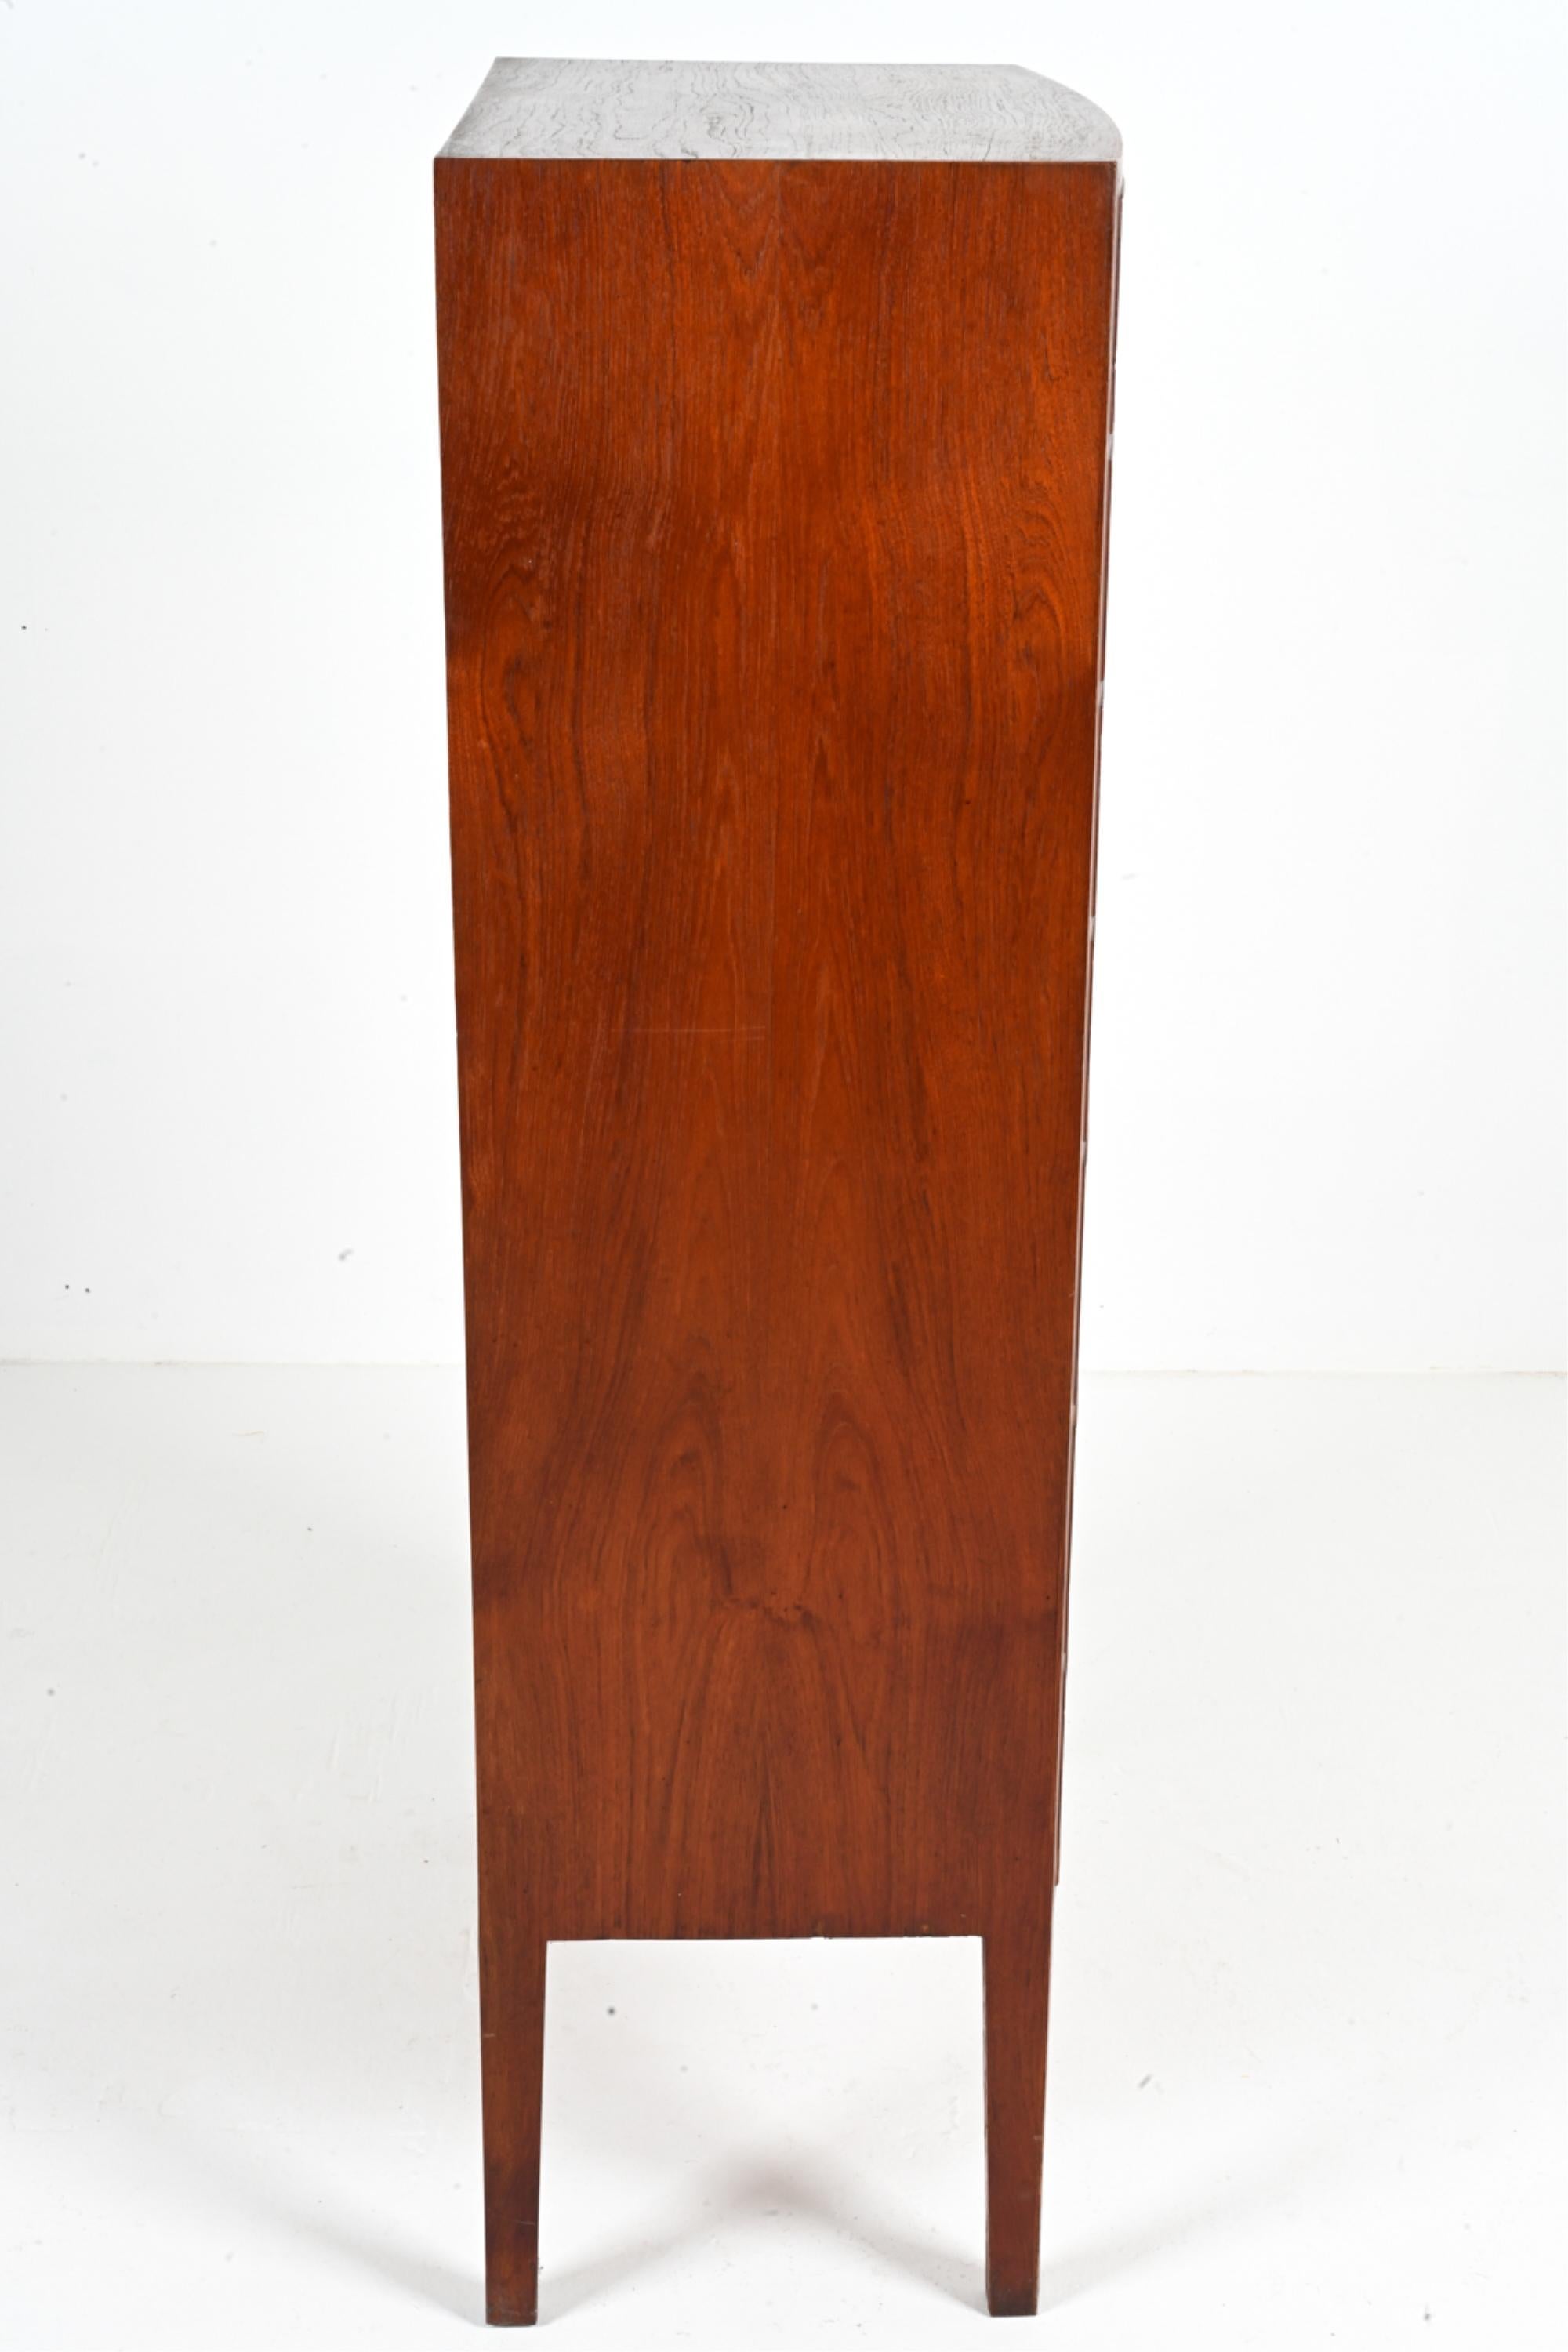 Danish Mid-Century Teak Bow-Front Tallboy Chest Attributed to Ole Wanscher For Sale 8